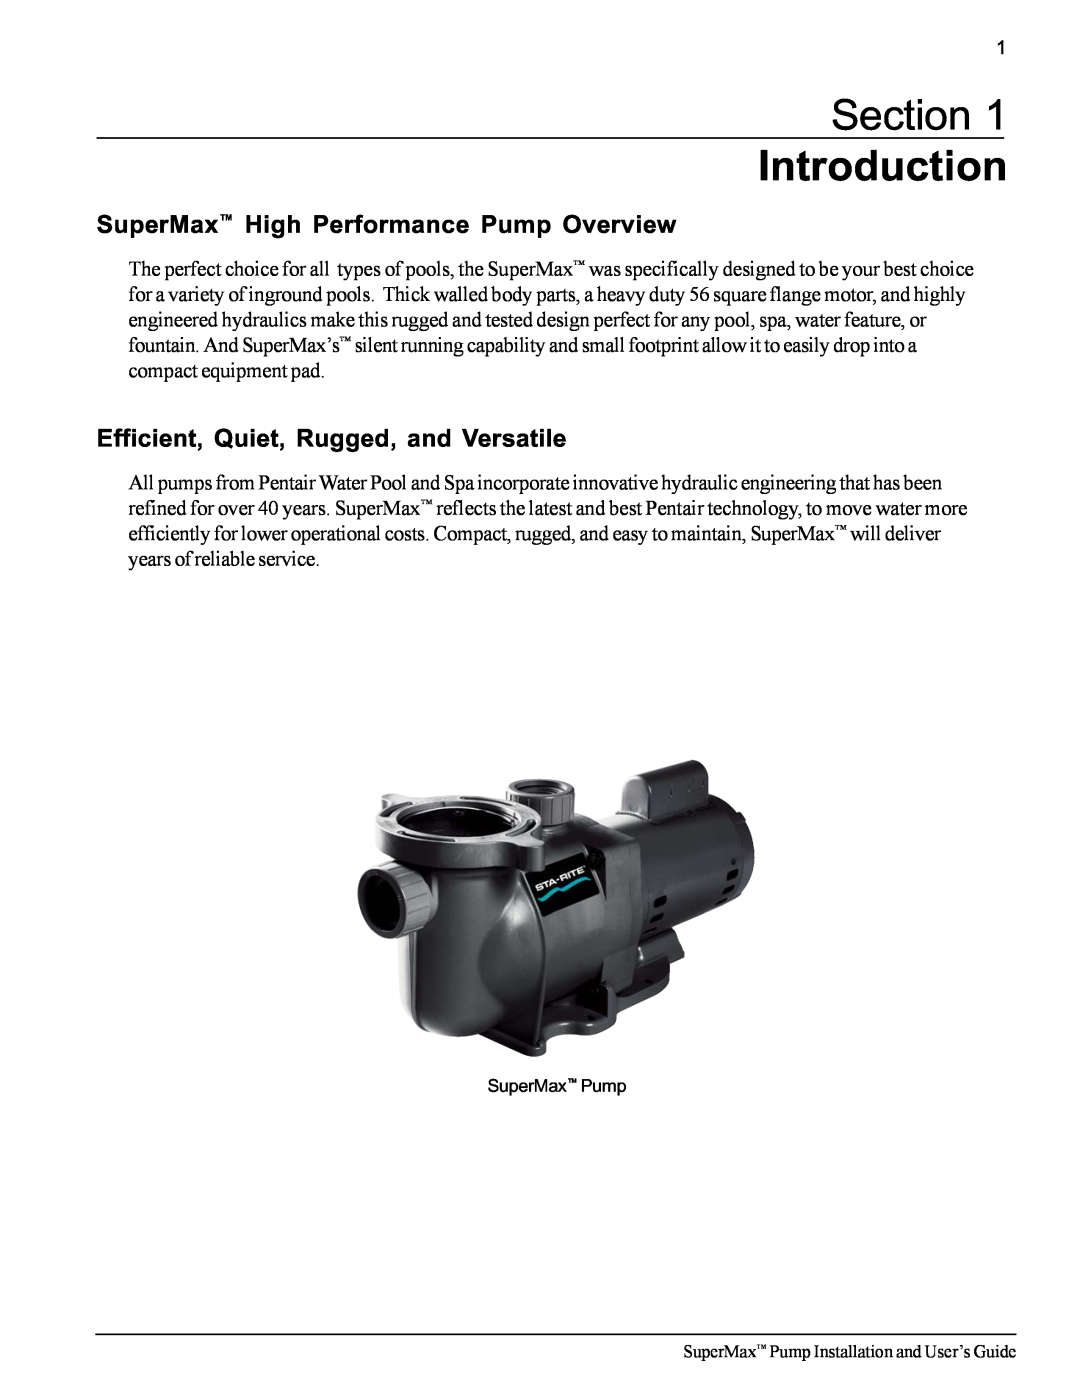 Pentair Section Introduction, SuperMax High Performance Pump Overview, Efficient, Quiet, Rugged, and Versatile 